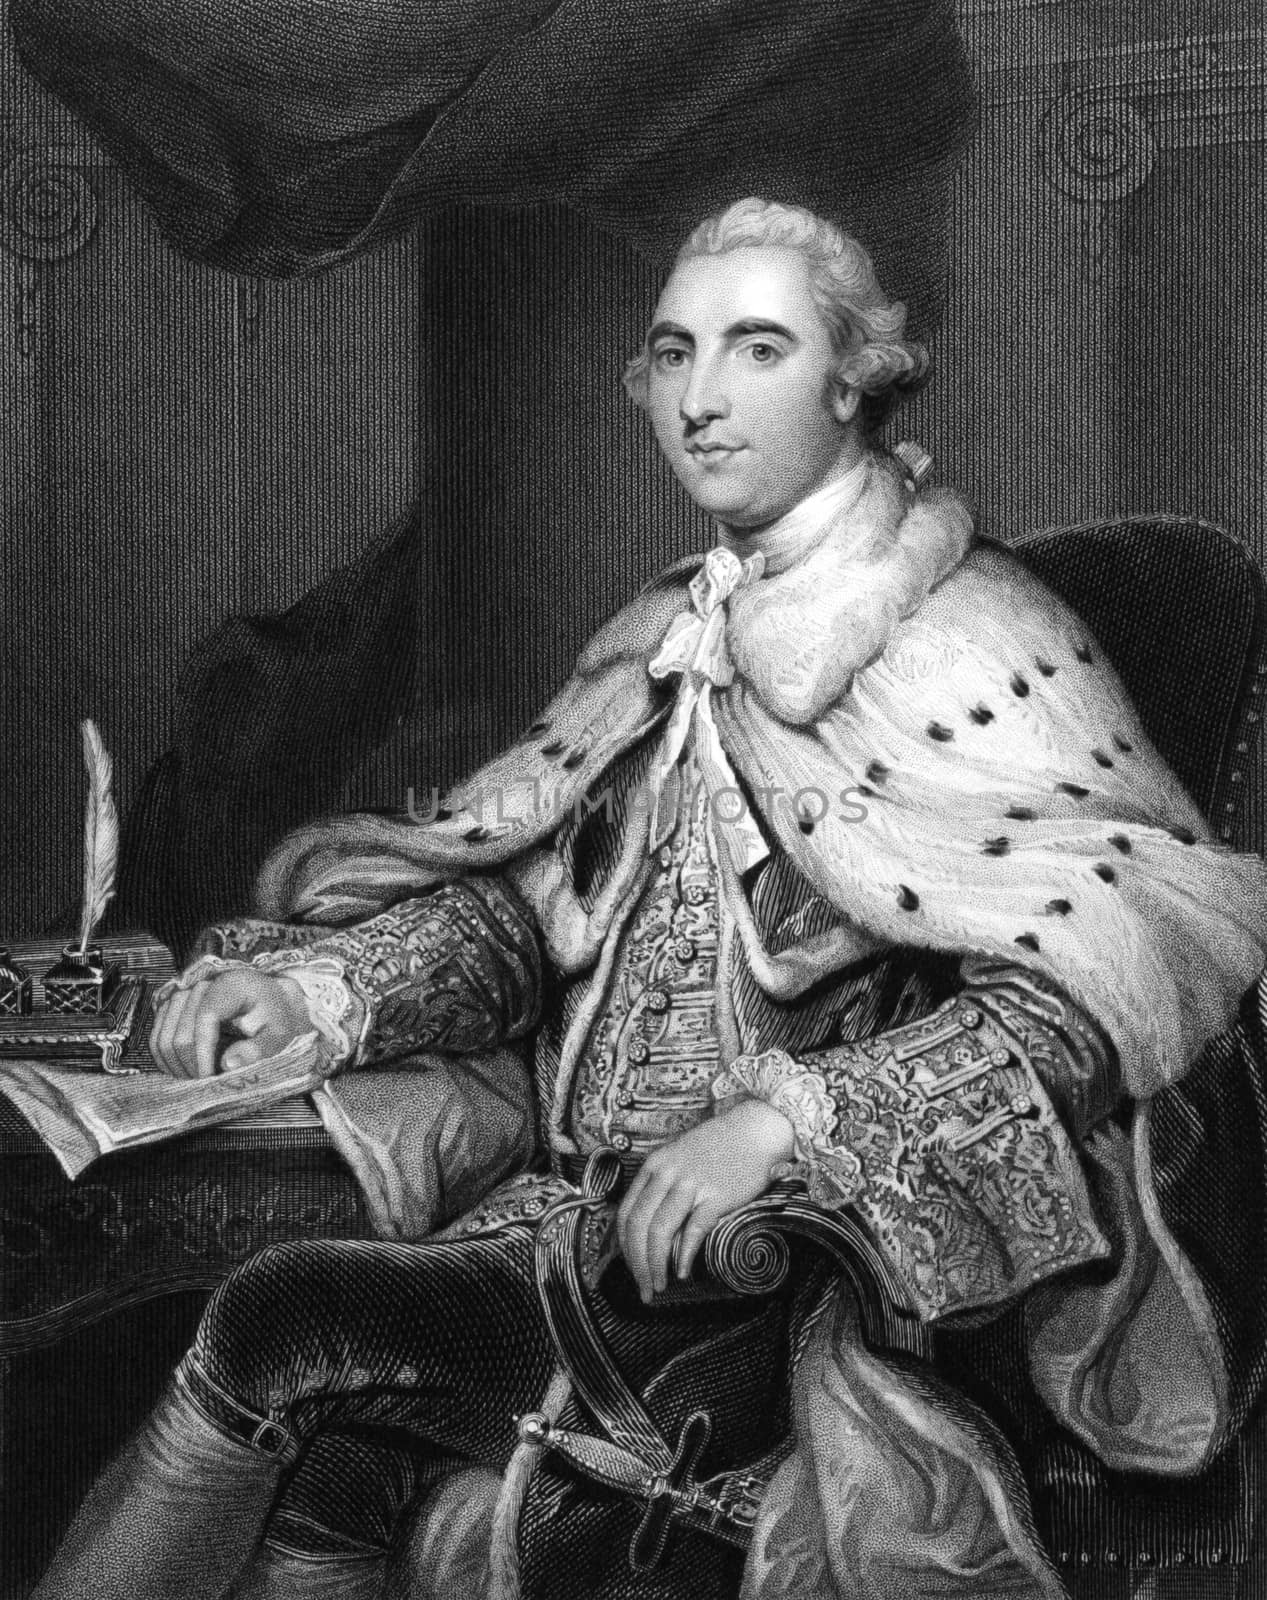 William Petty, 2nd Earl of Shelburne (1737-1805) on engraving from 1834. Prime Minister of Great Britain during 1782-1783. Engraved by H.Robinson and published in ''Portraits of Illustrious Personages of Great Britain'',UK,1834.